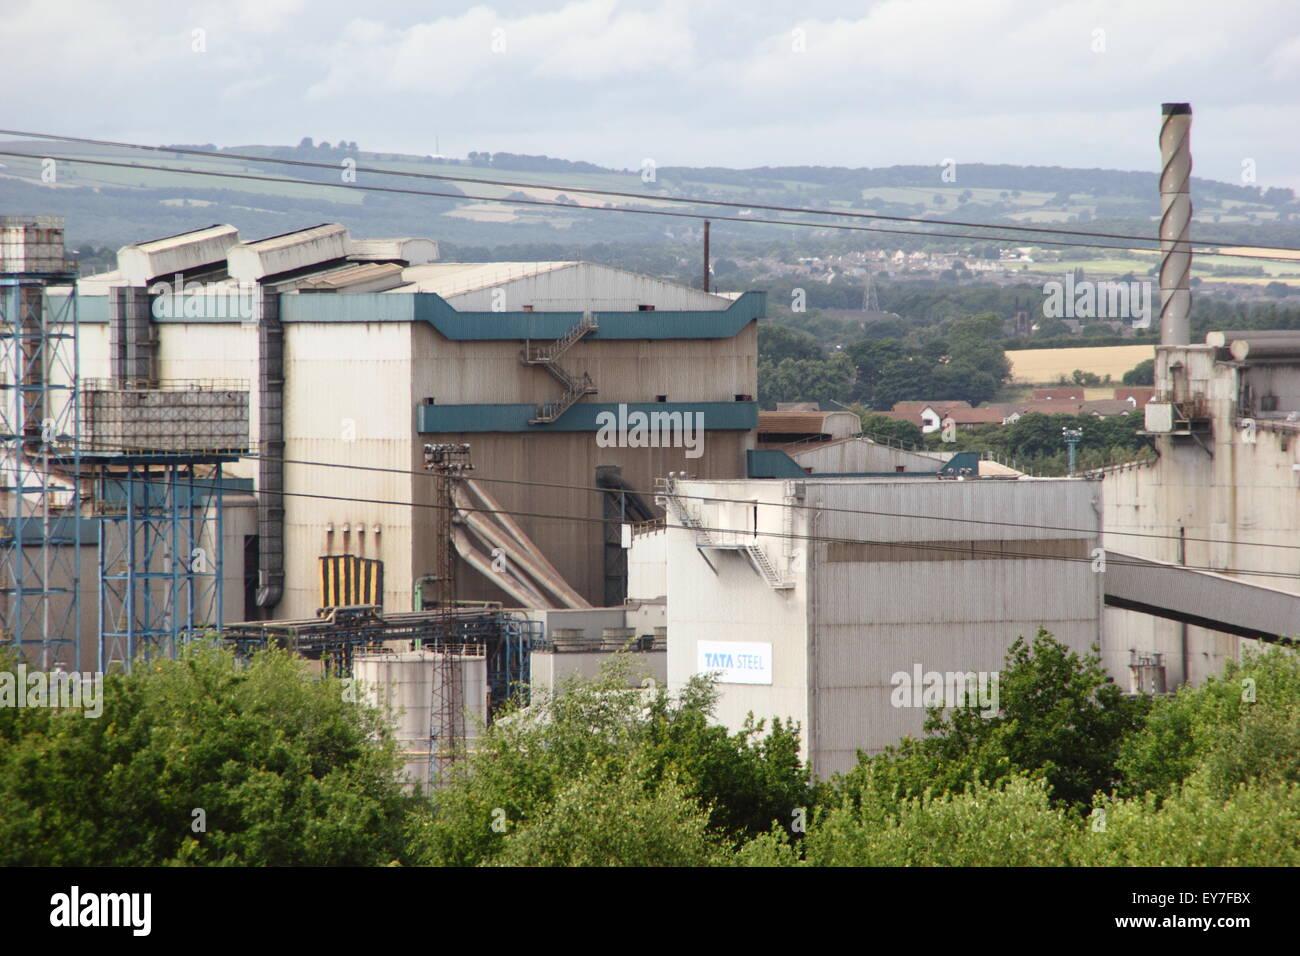 Tata steel plant à Rotherham, South Yorkshire, Angleterre Royaume-uni - Juillet 2015 Banque D'Images